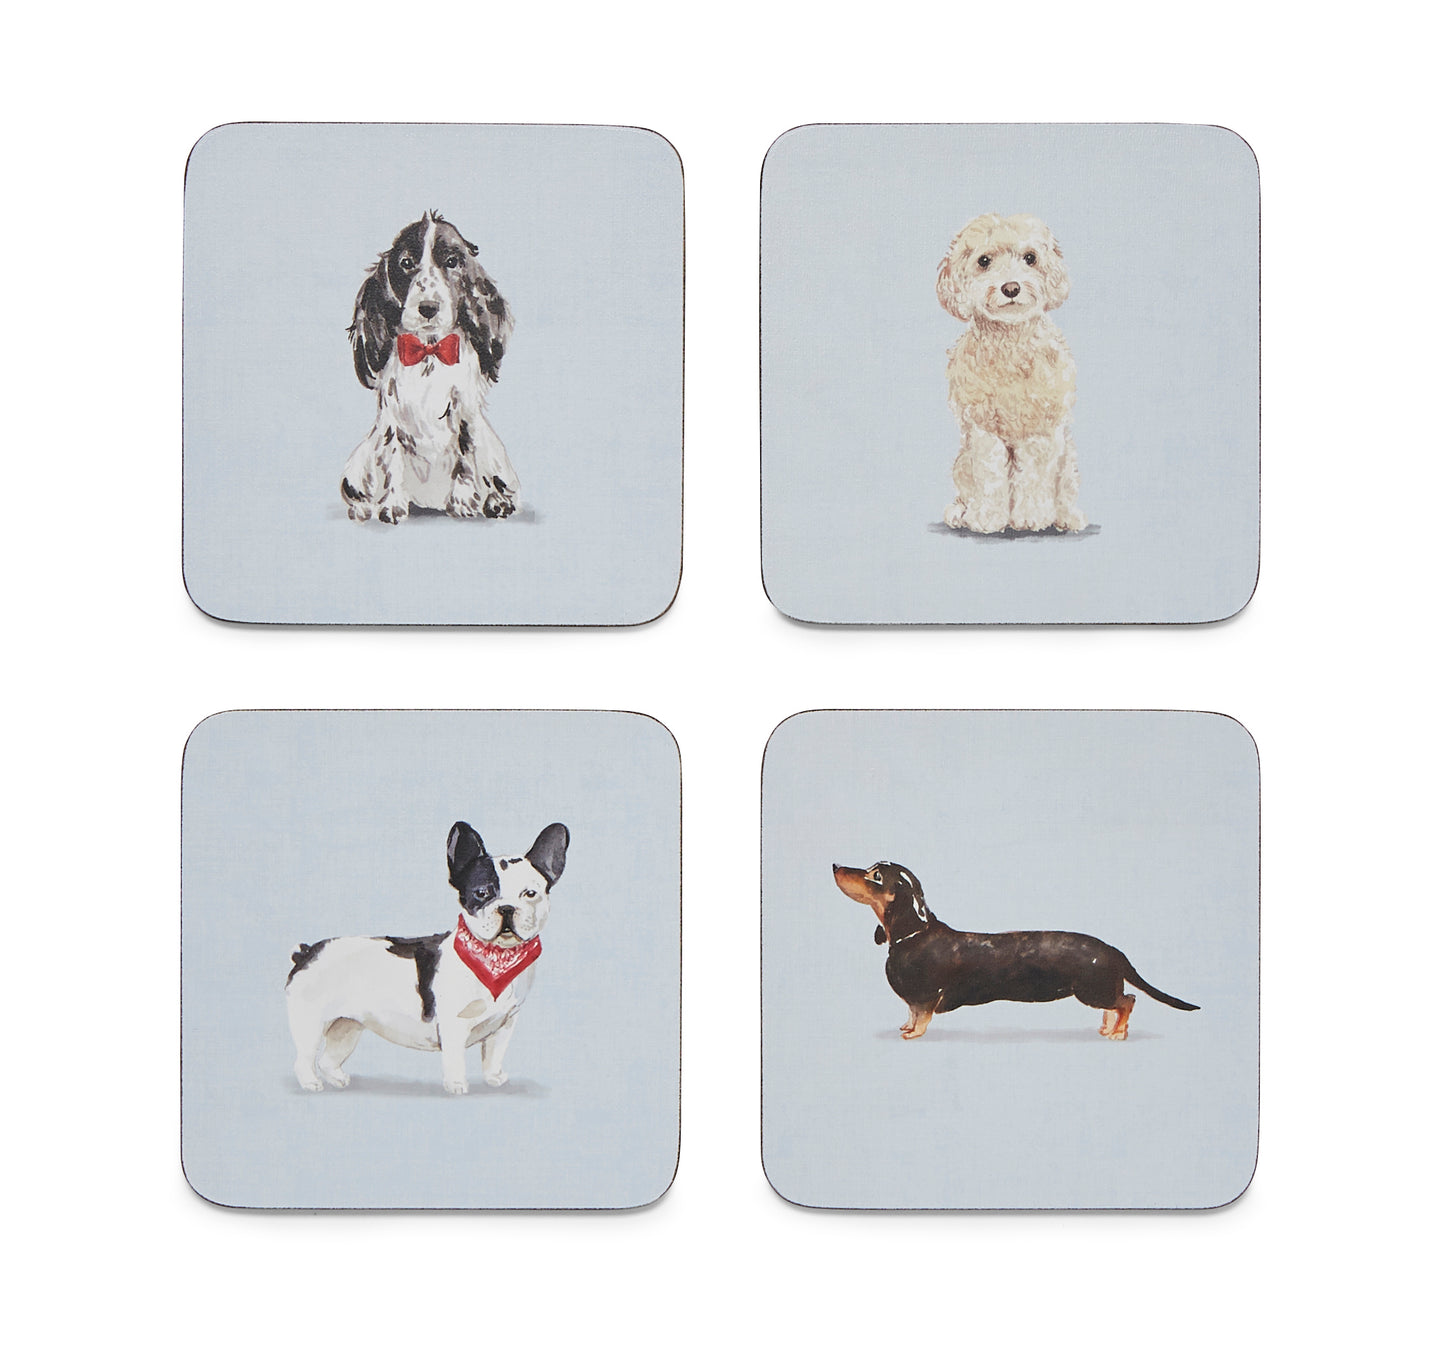 Coasters from the coordinating range of kitchenware and textiles from cooksmart.